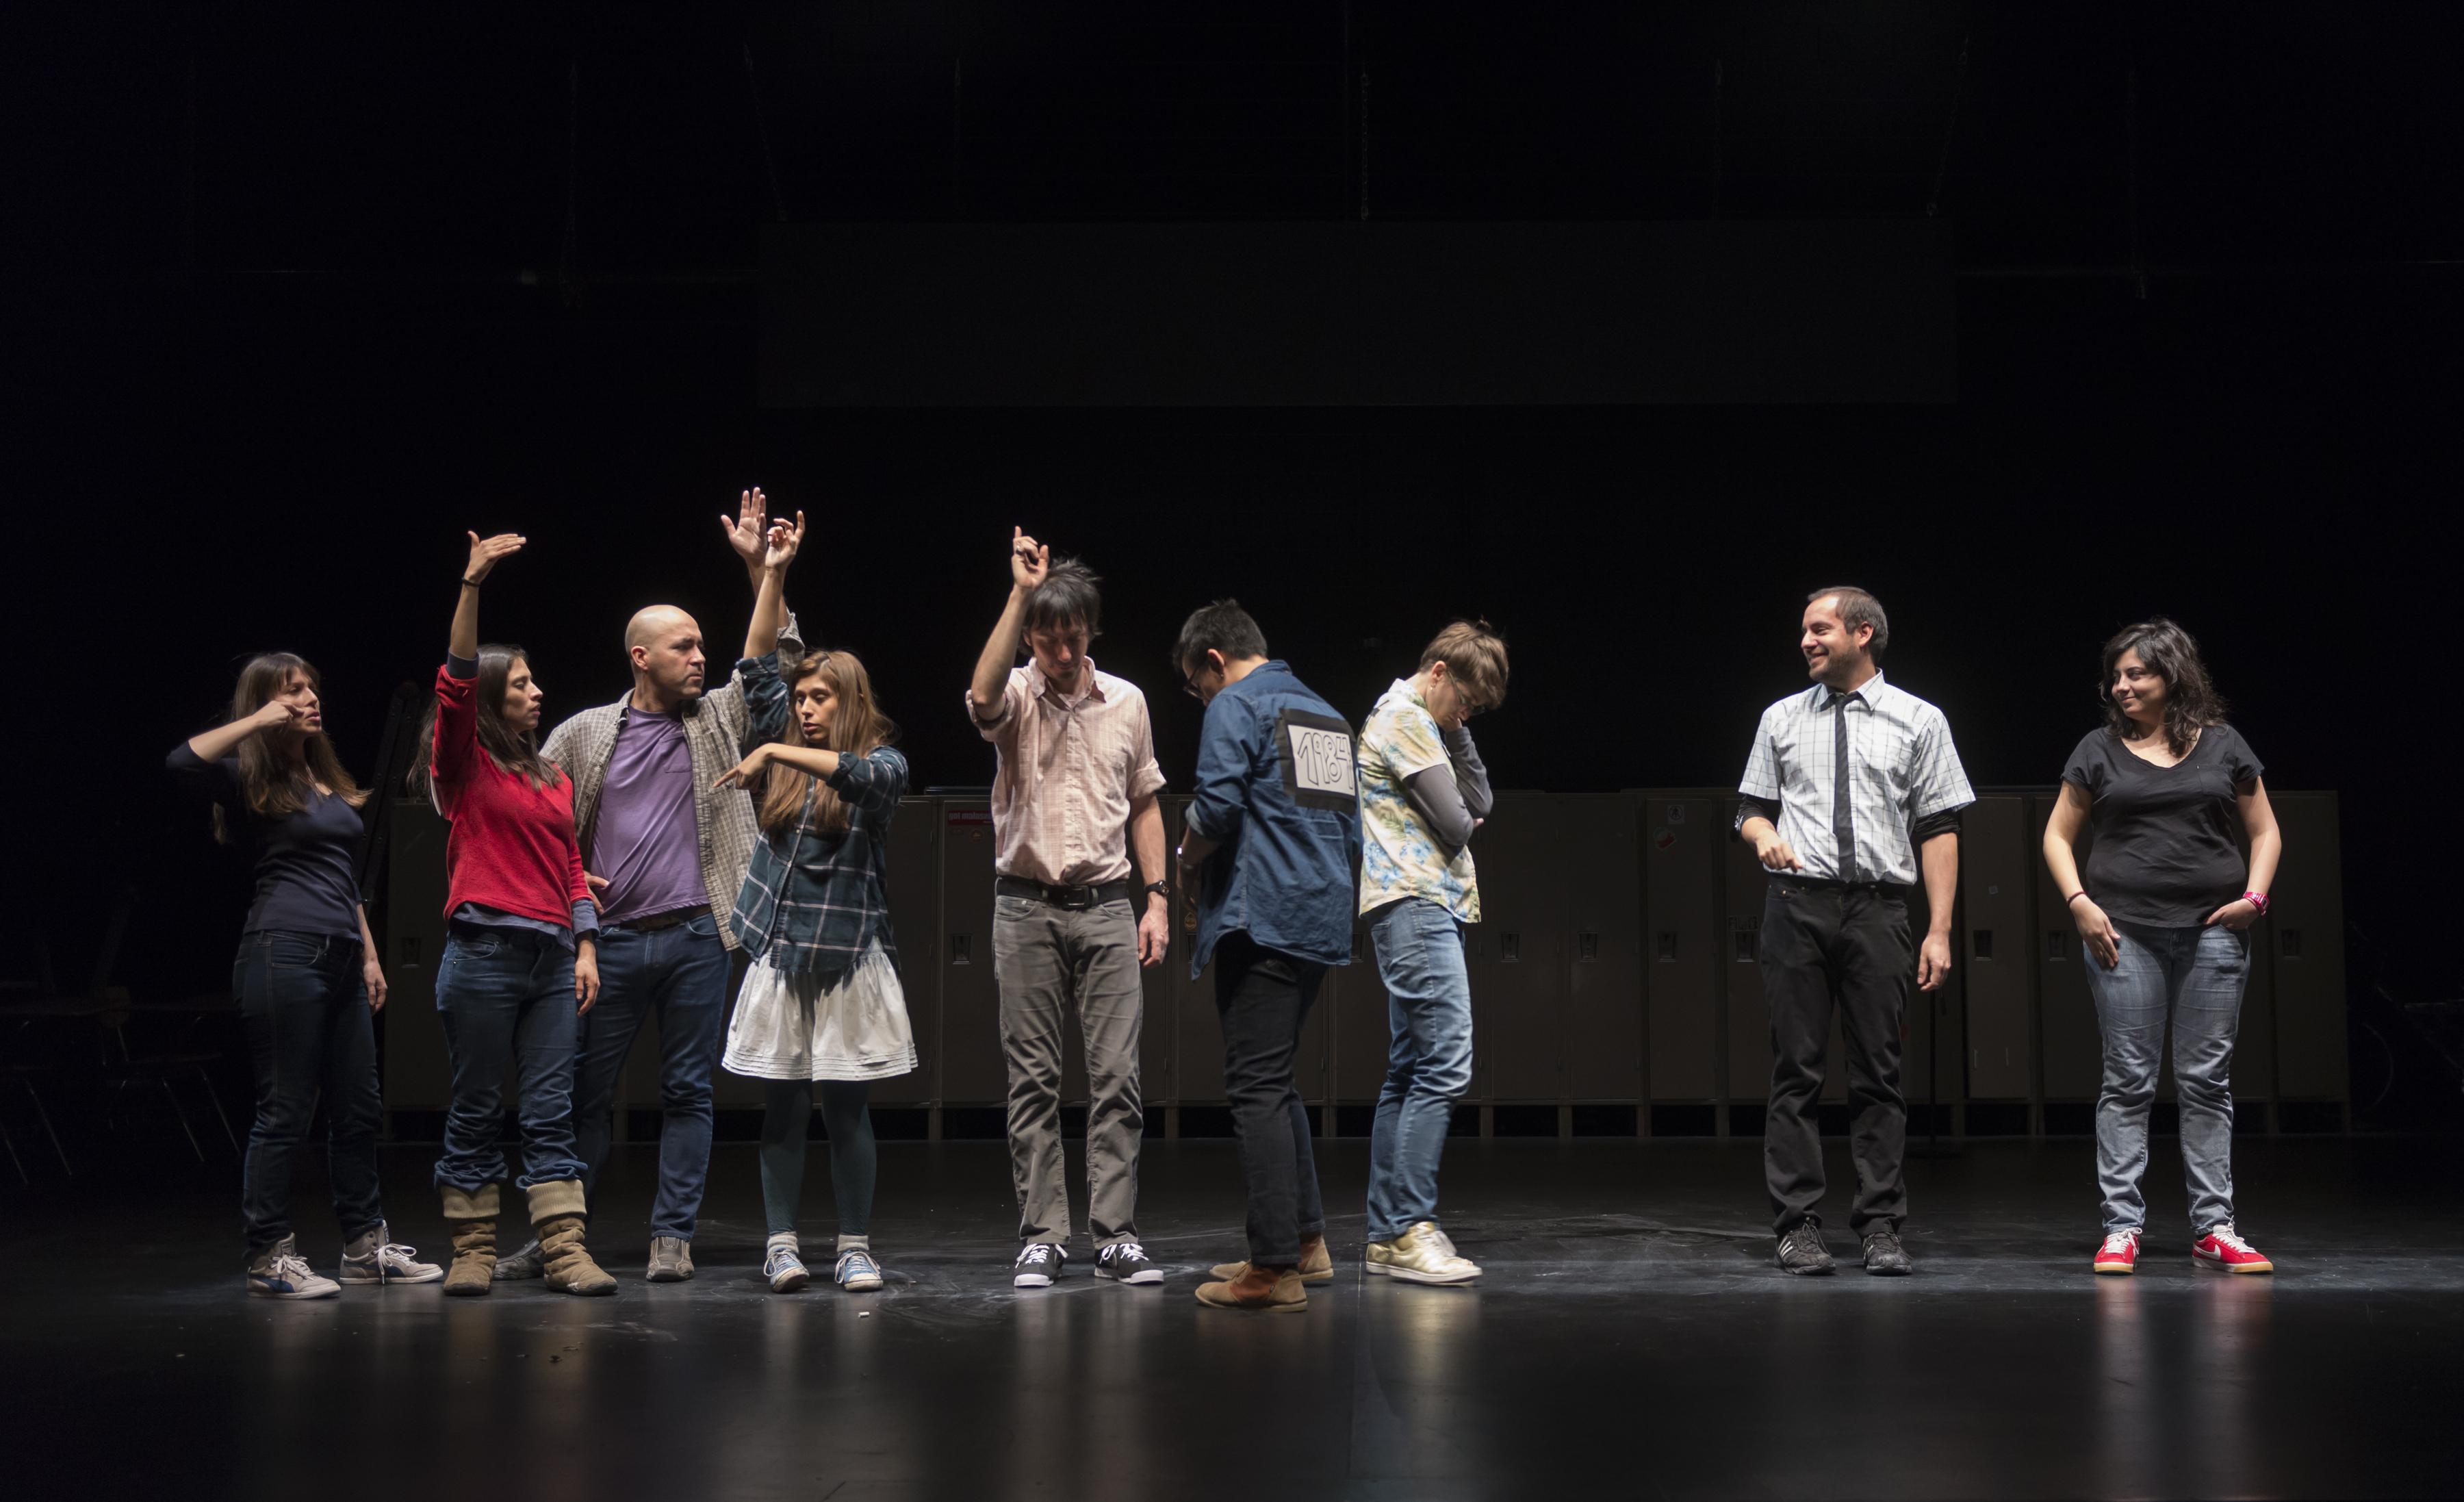 On a dark stage with lockers barely visible in the background, nine people stand in a row, five of them gesturing with their arms.